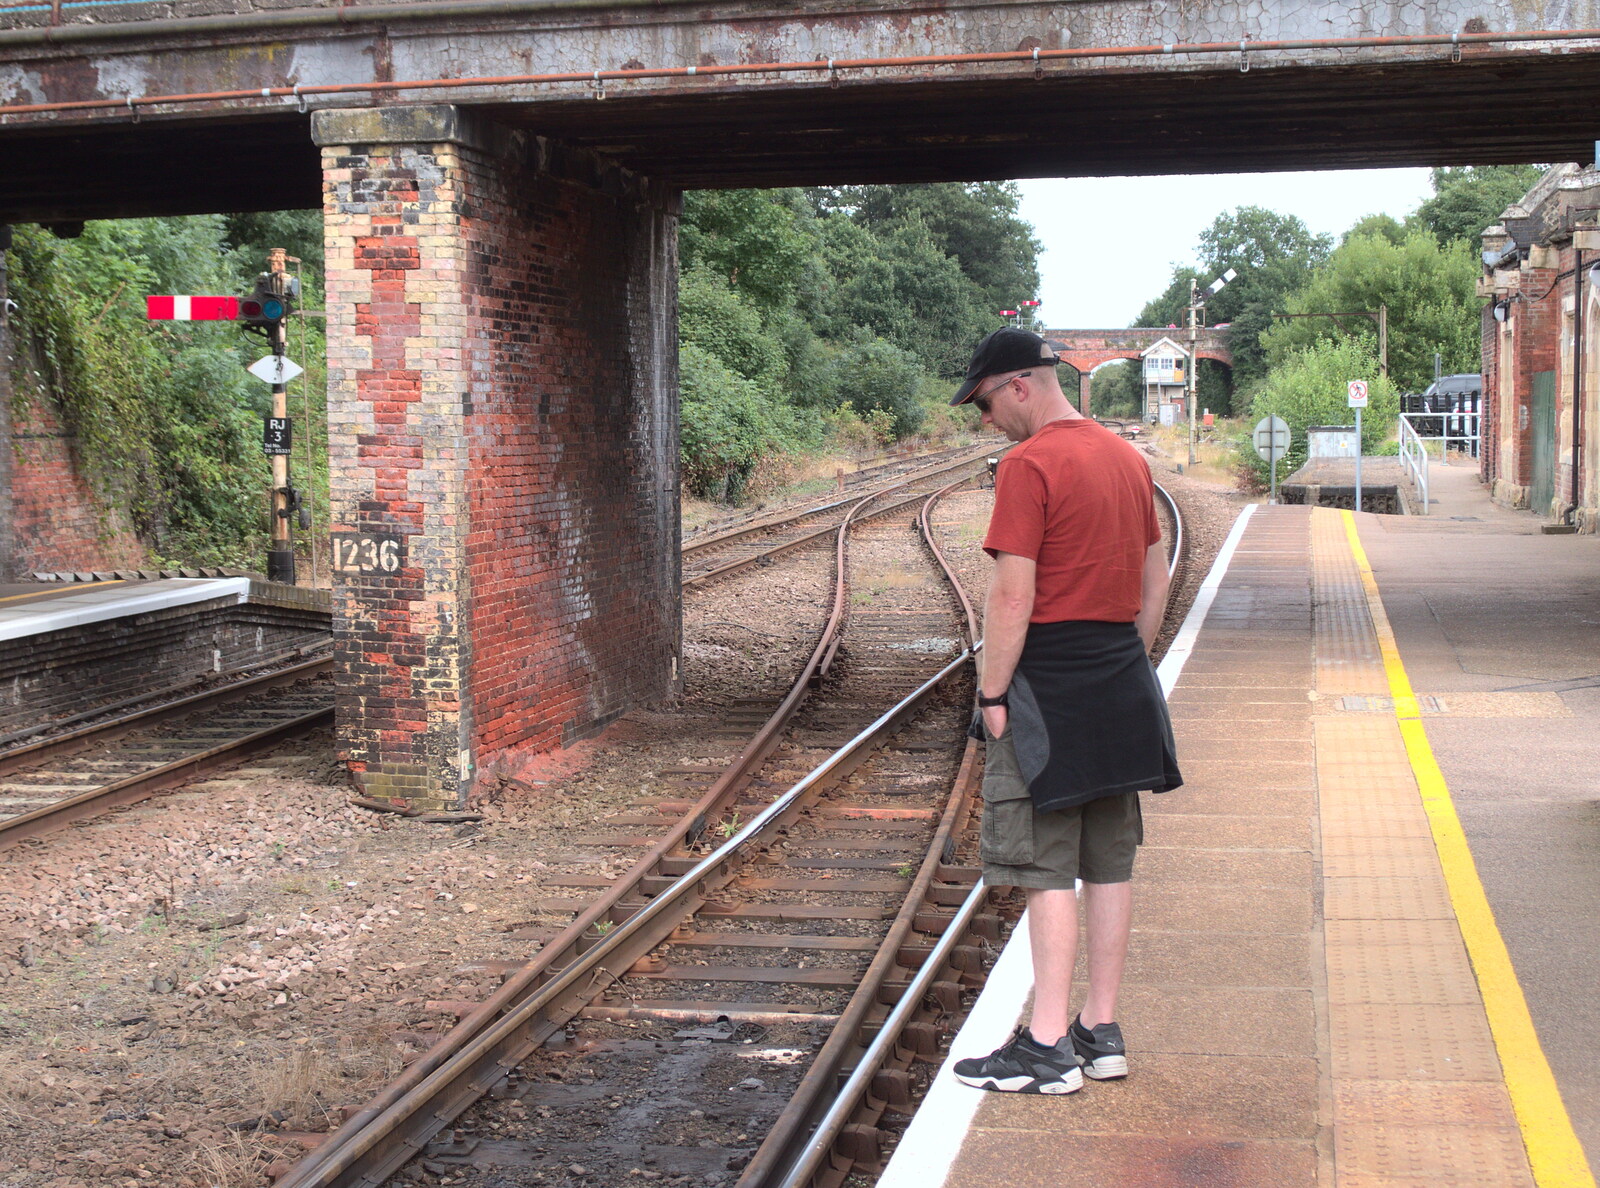 Paul inspects the tracks from The Humpty Dumpty Beer Festival, Reedham, Norfolk - 22nd July 2017